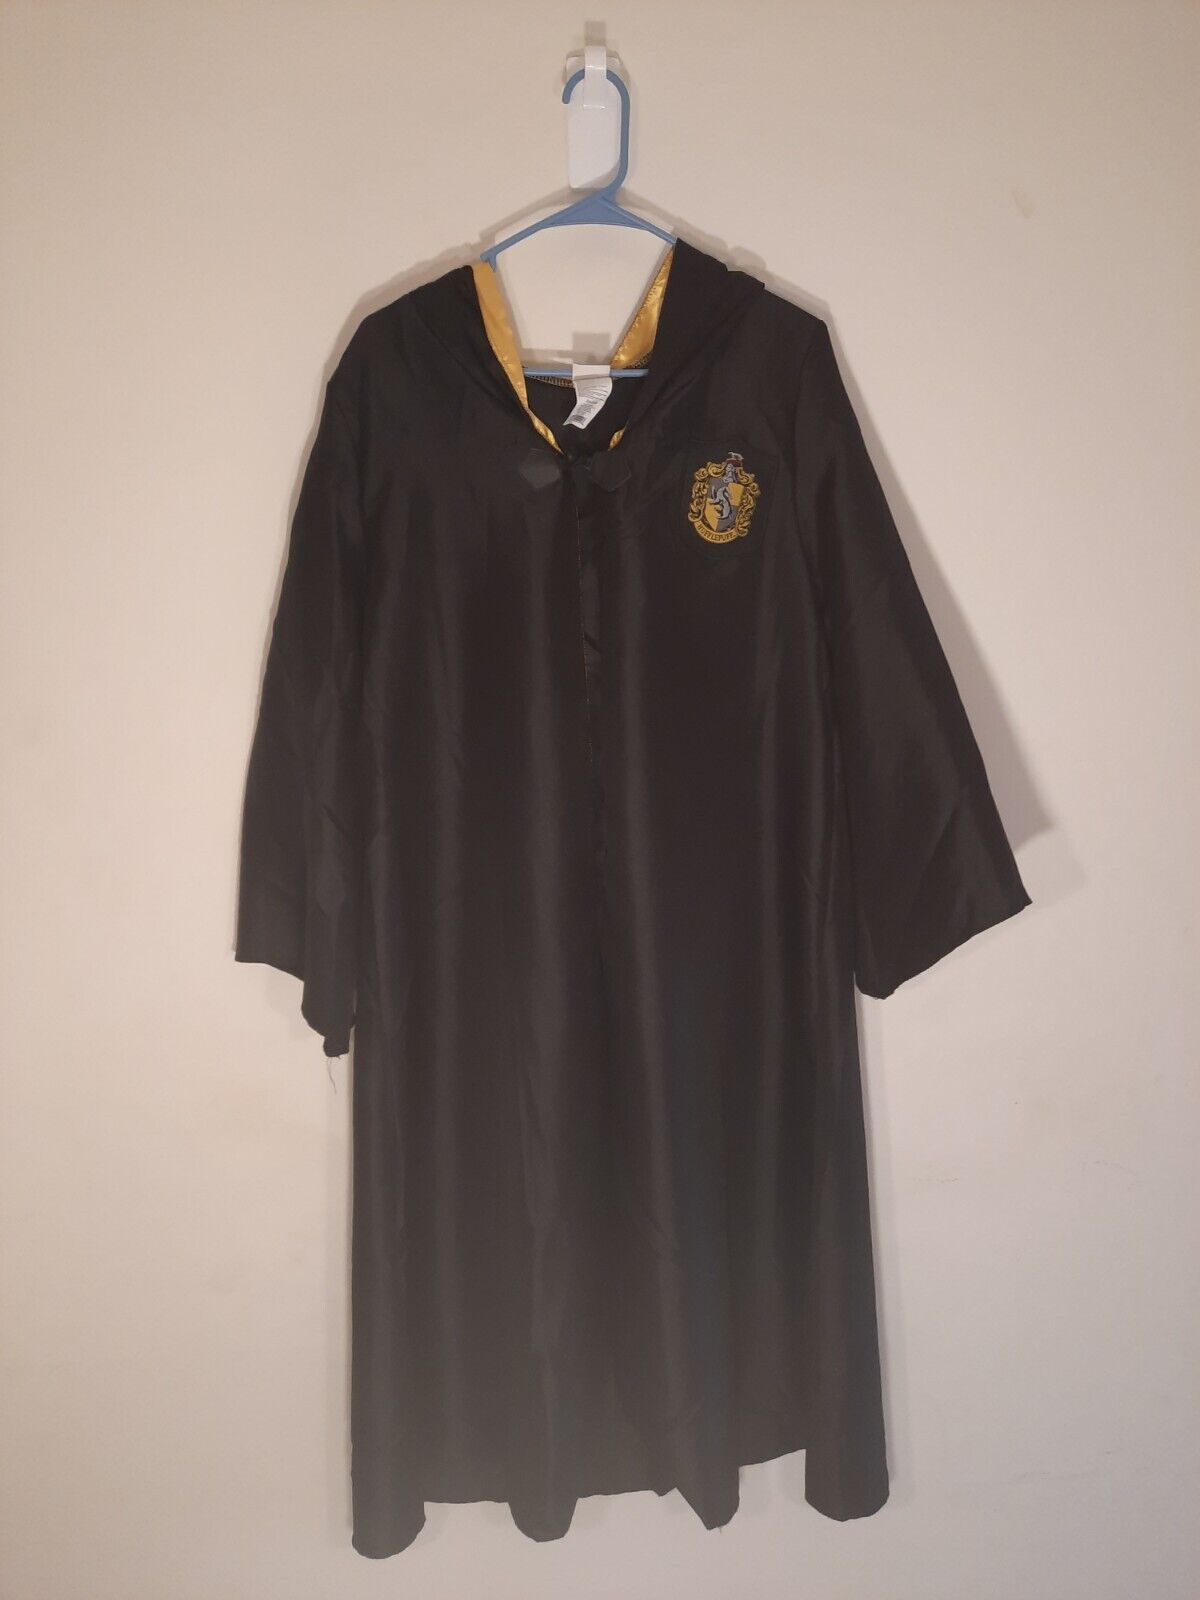 HARRY POTTER Hooded hufflepuff Wizards Robe Size Youth Xl